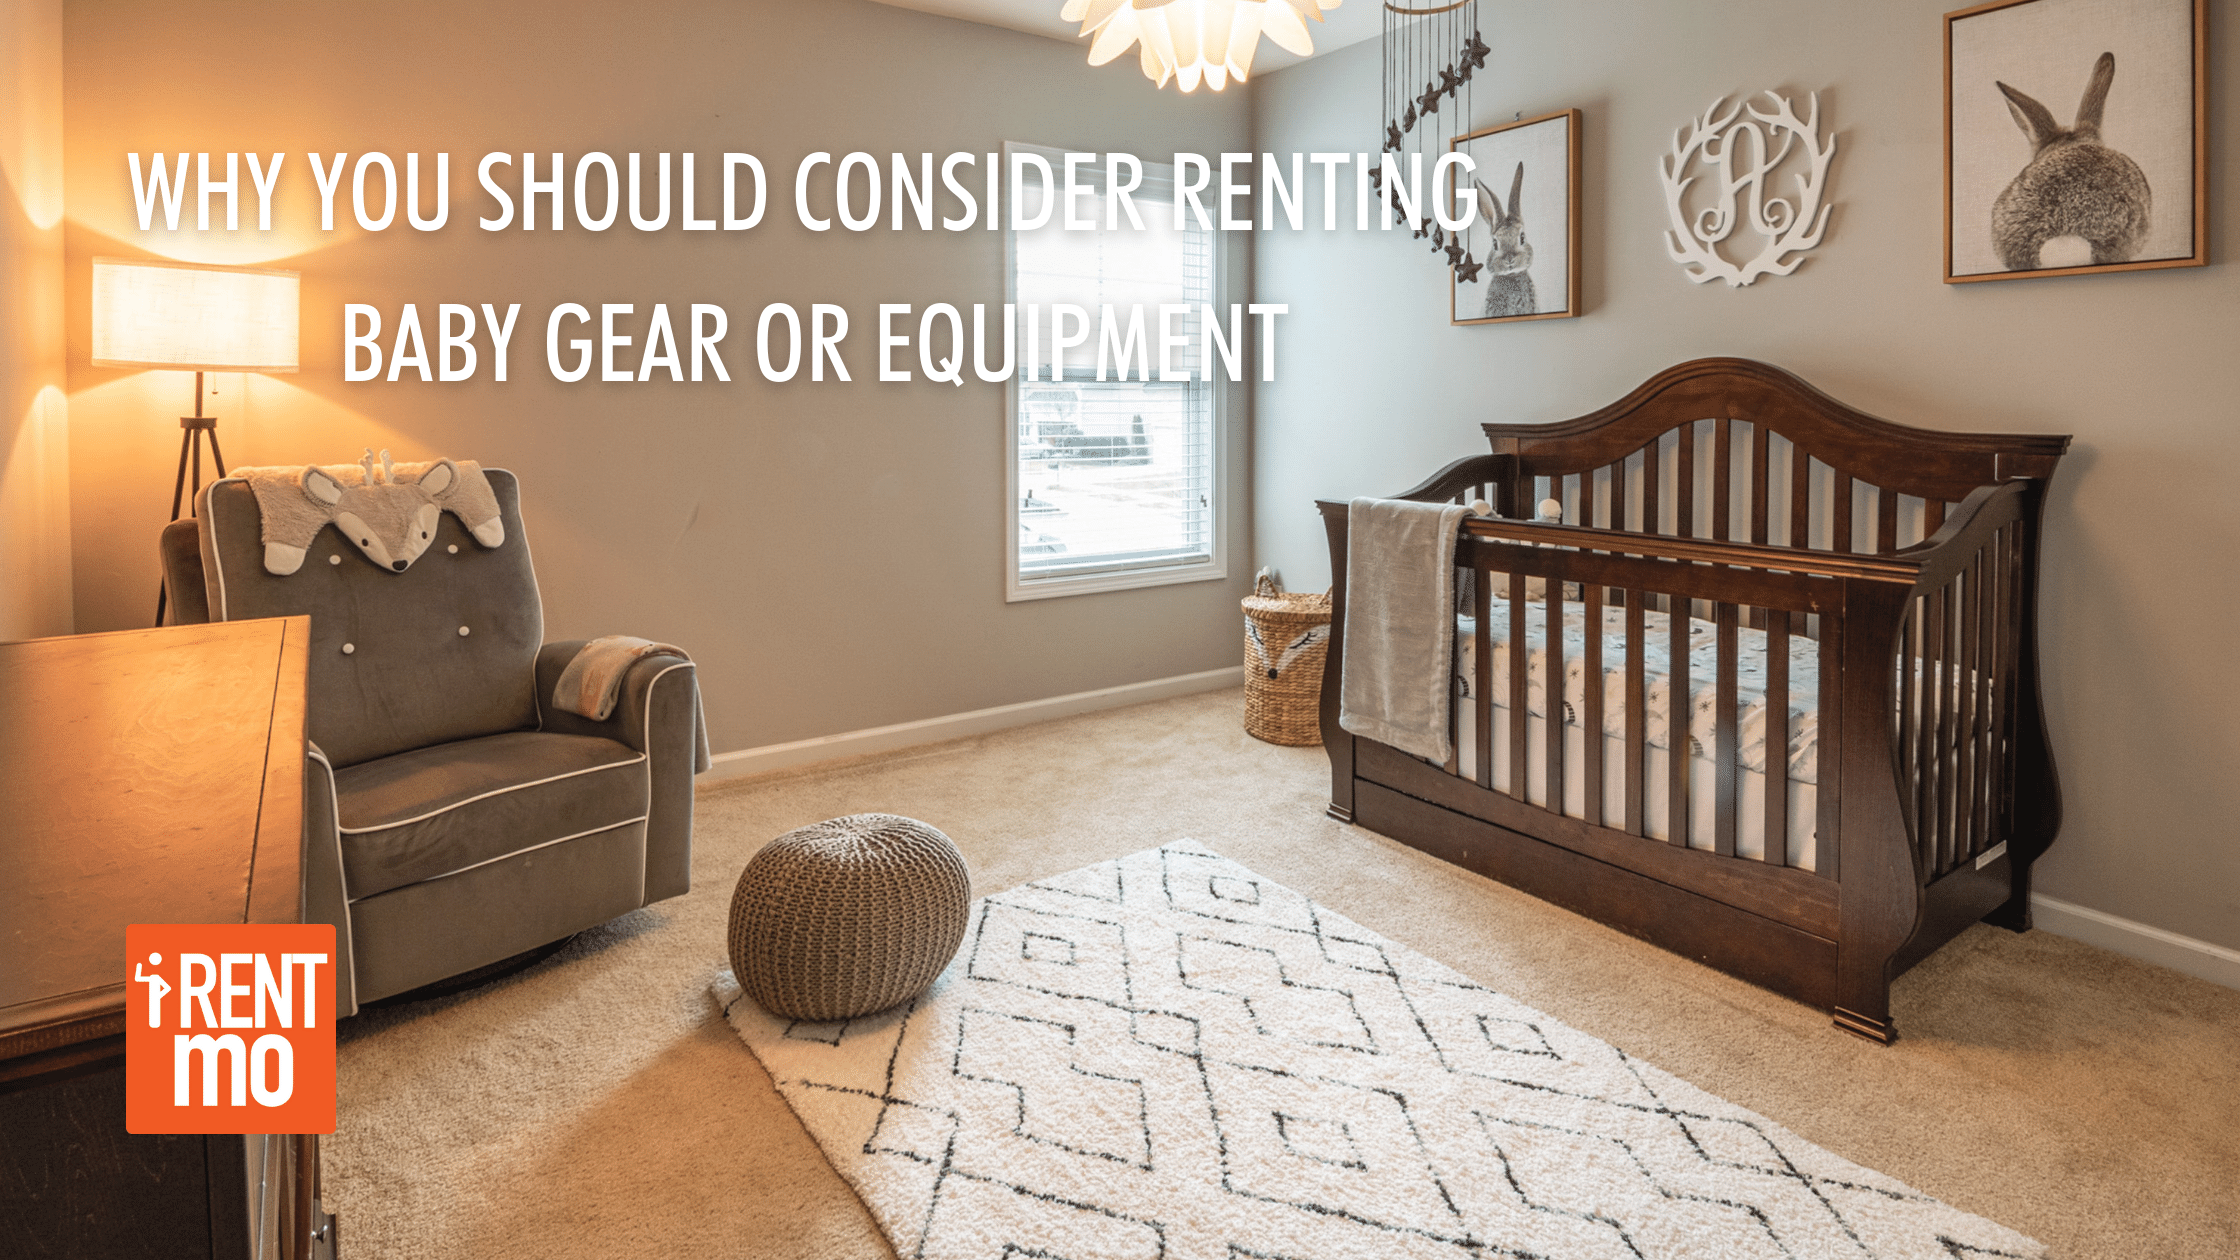 Why You Should Consider Renting Baby Gear or Equipment